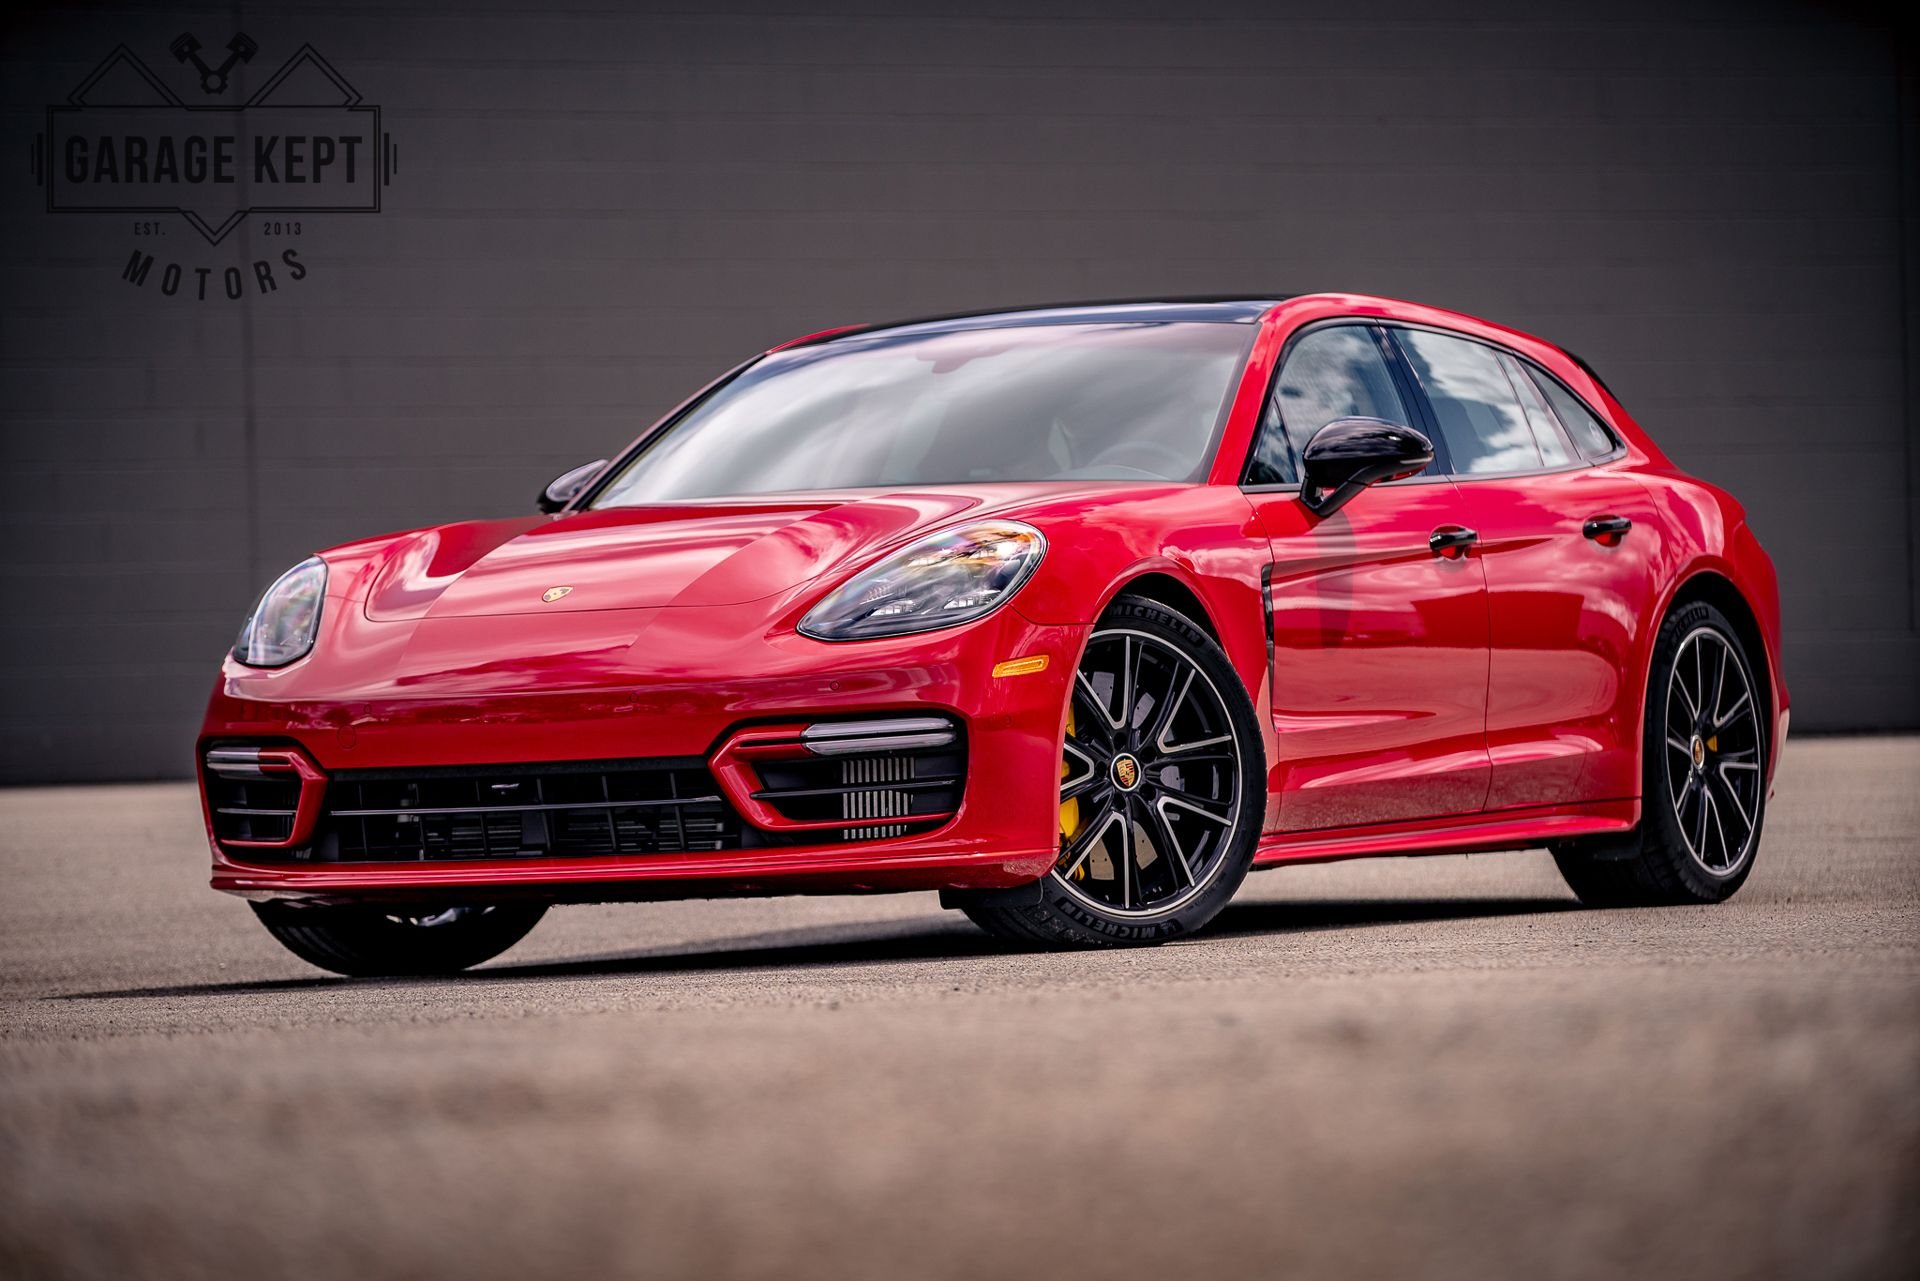 Lightly Used 2021 Porsche Panamera GTS Sport Turismo Costs More Than a